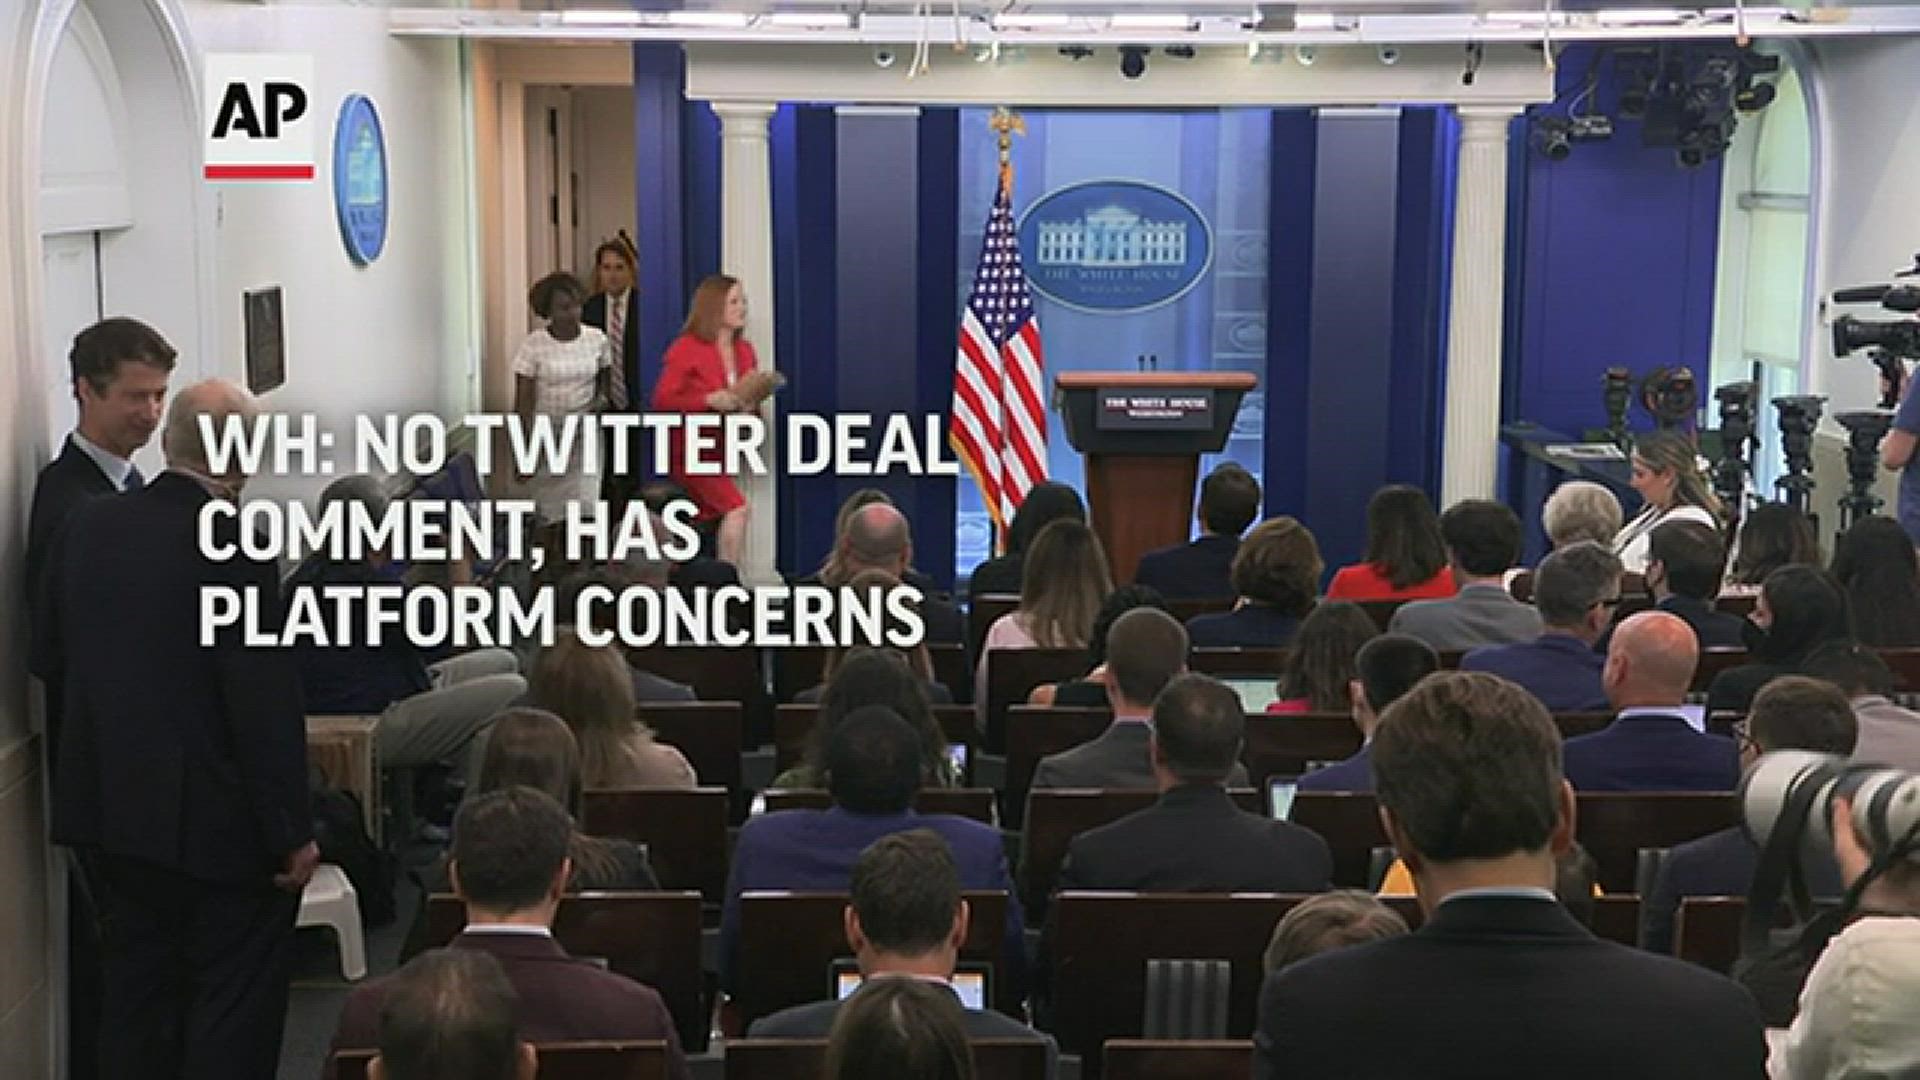 The White House won't directly comment on Elon Musk's acquisition of Twitter, but says President Biden has concerns about the power of large social media platforms.